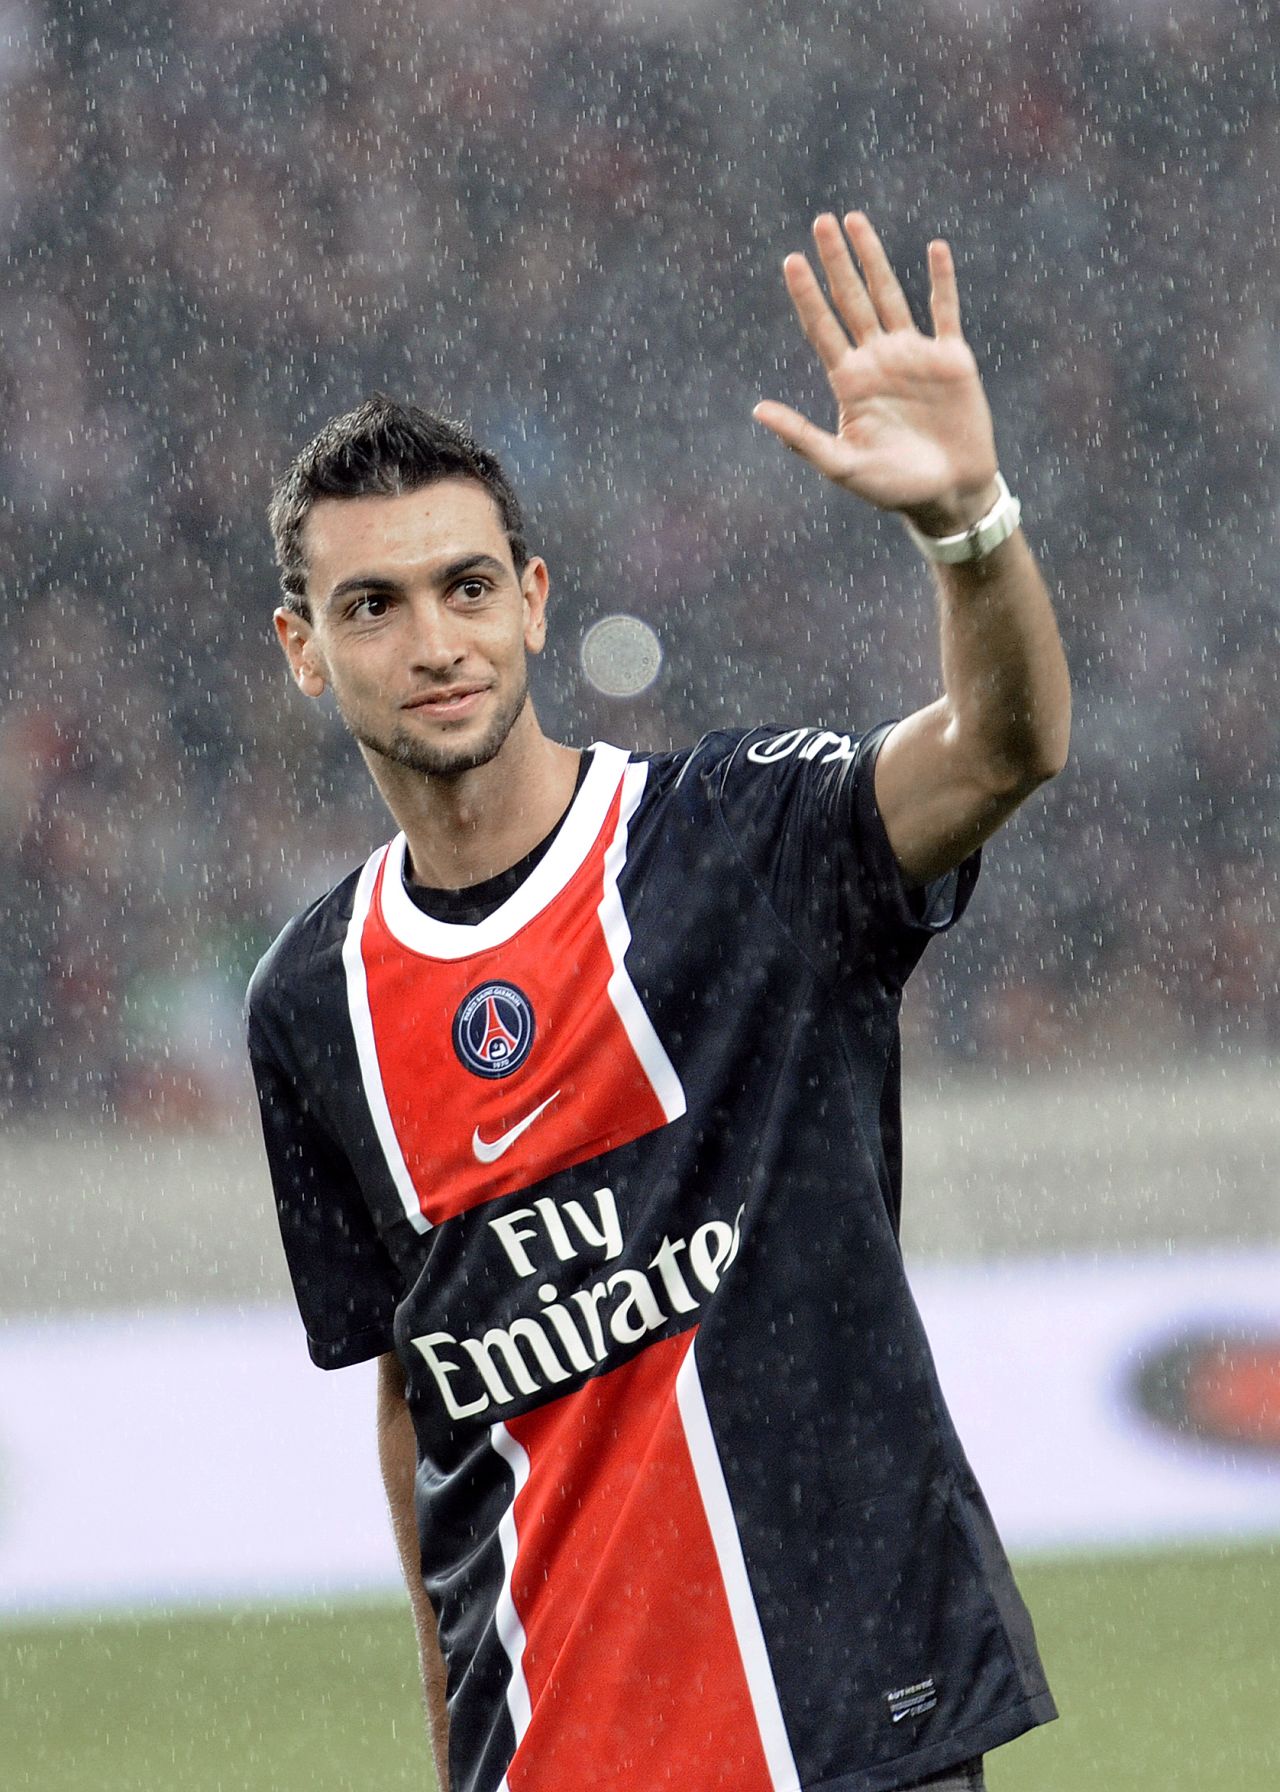 The signing of Argentina midfielder Javier Pastore for a reported fee of $57 million in June 2011 demonstrated the new wealth at PSG's disposal.